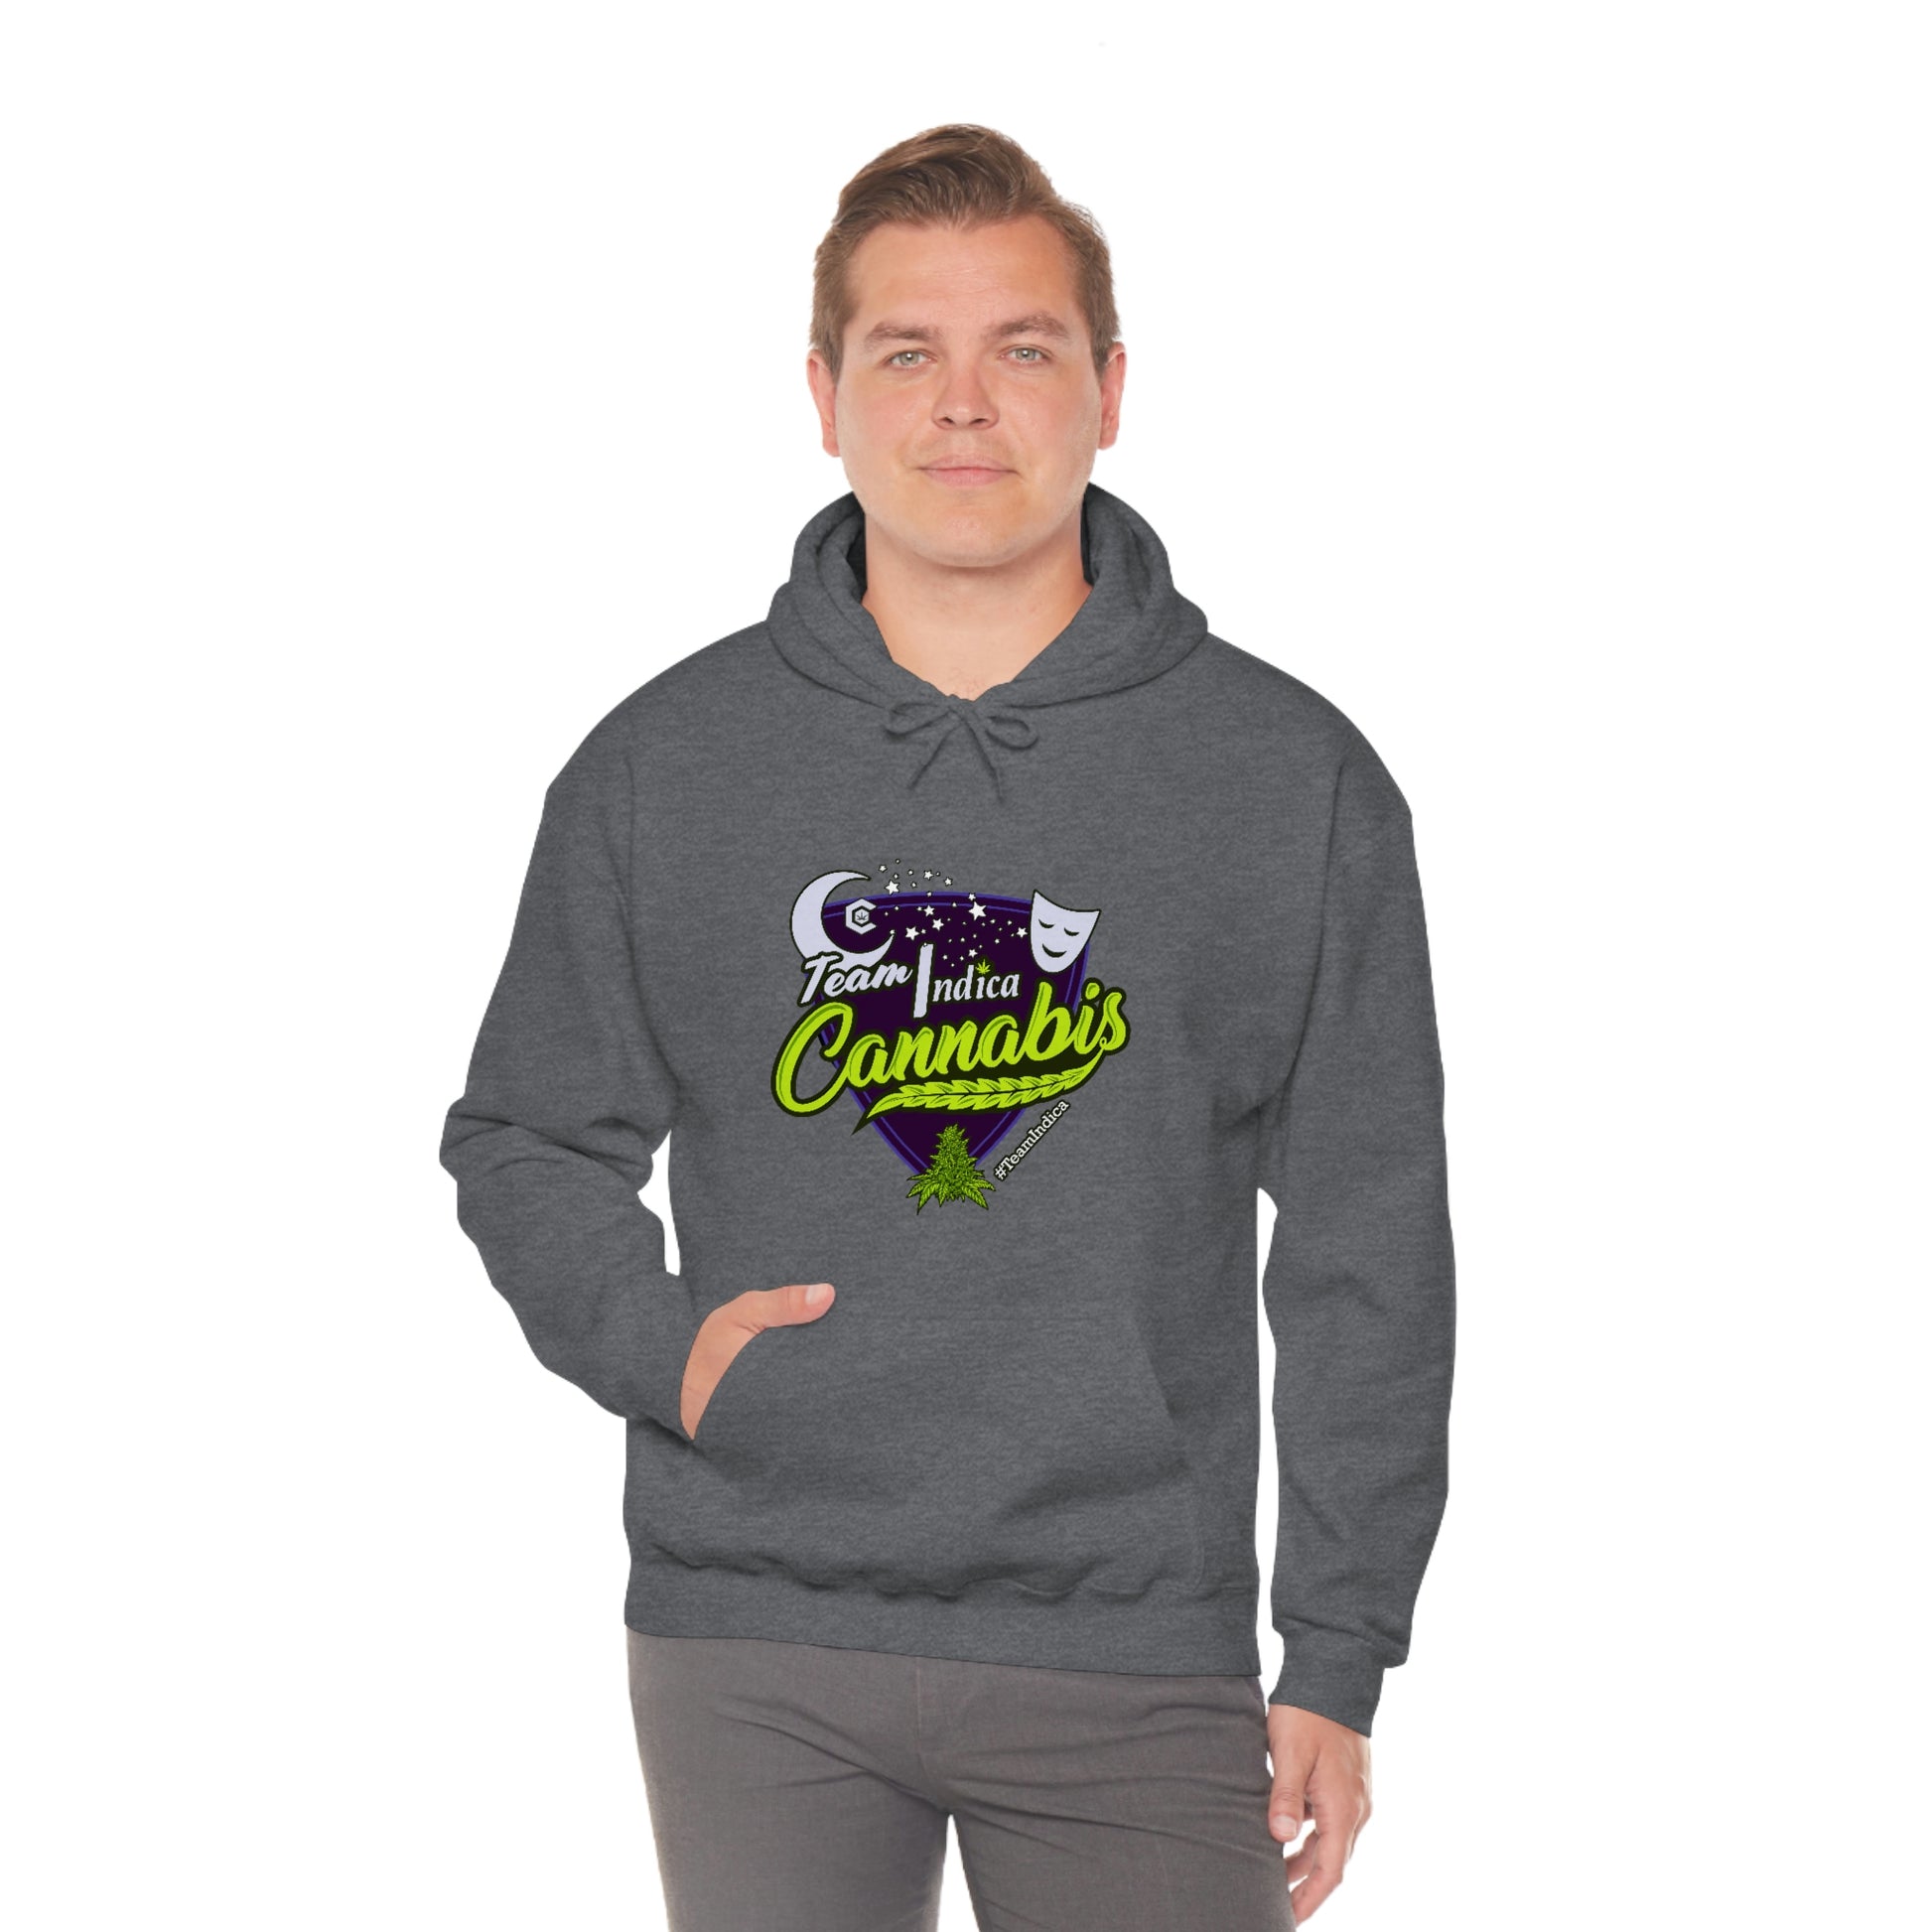 a man wearing a grey Team Indica Cannabis Pullover hoodie.